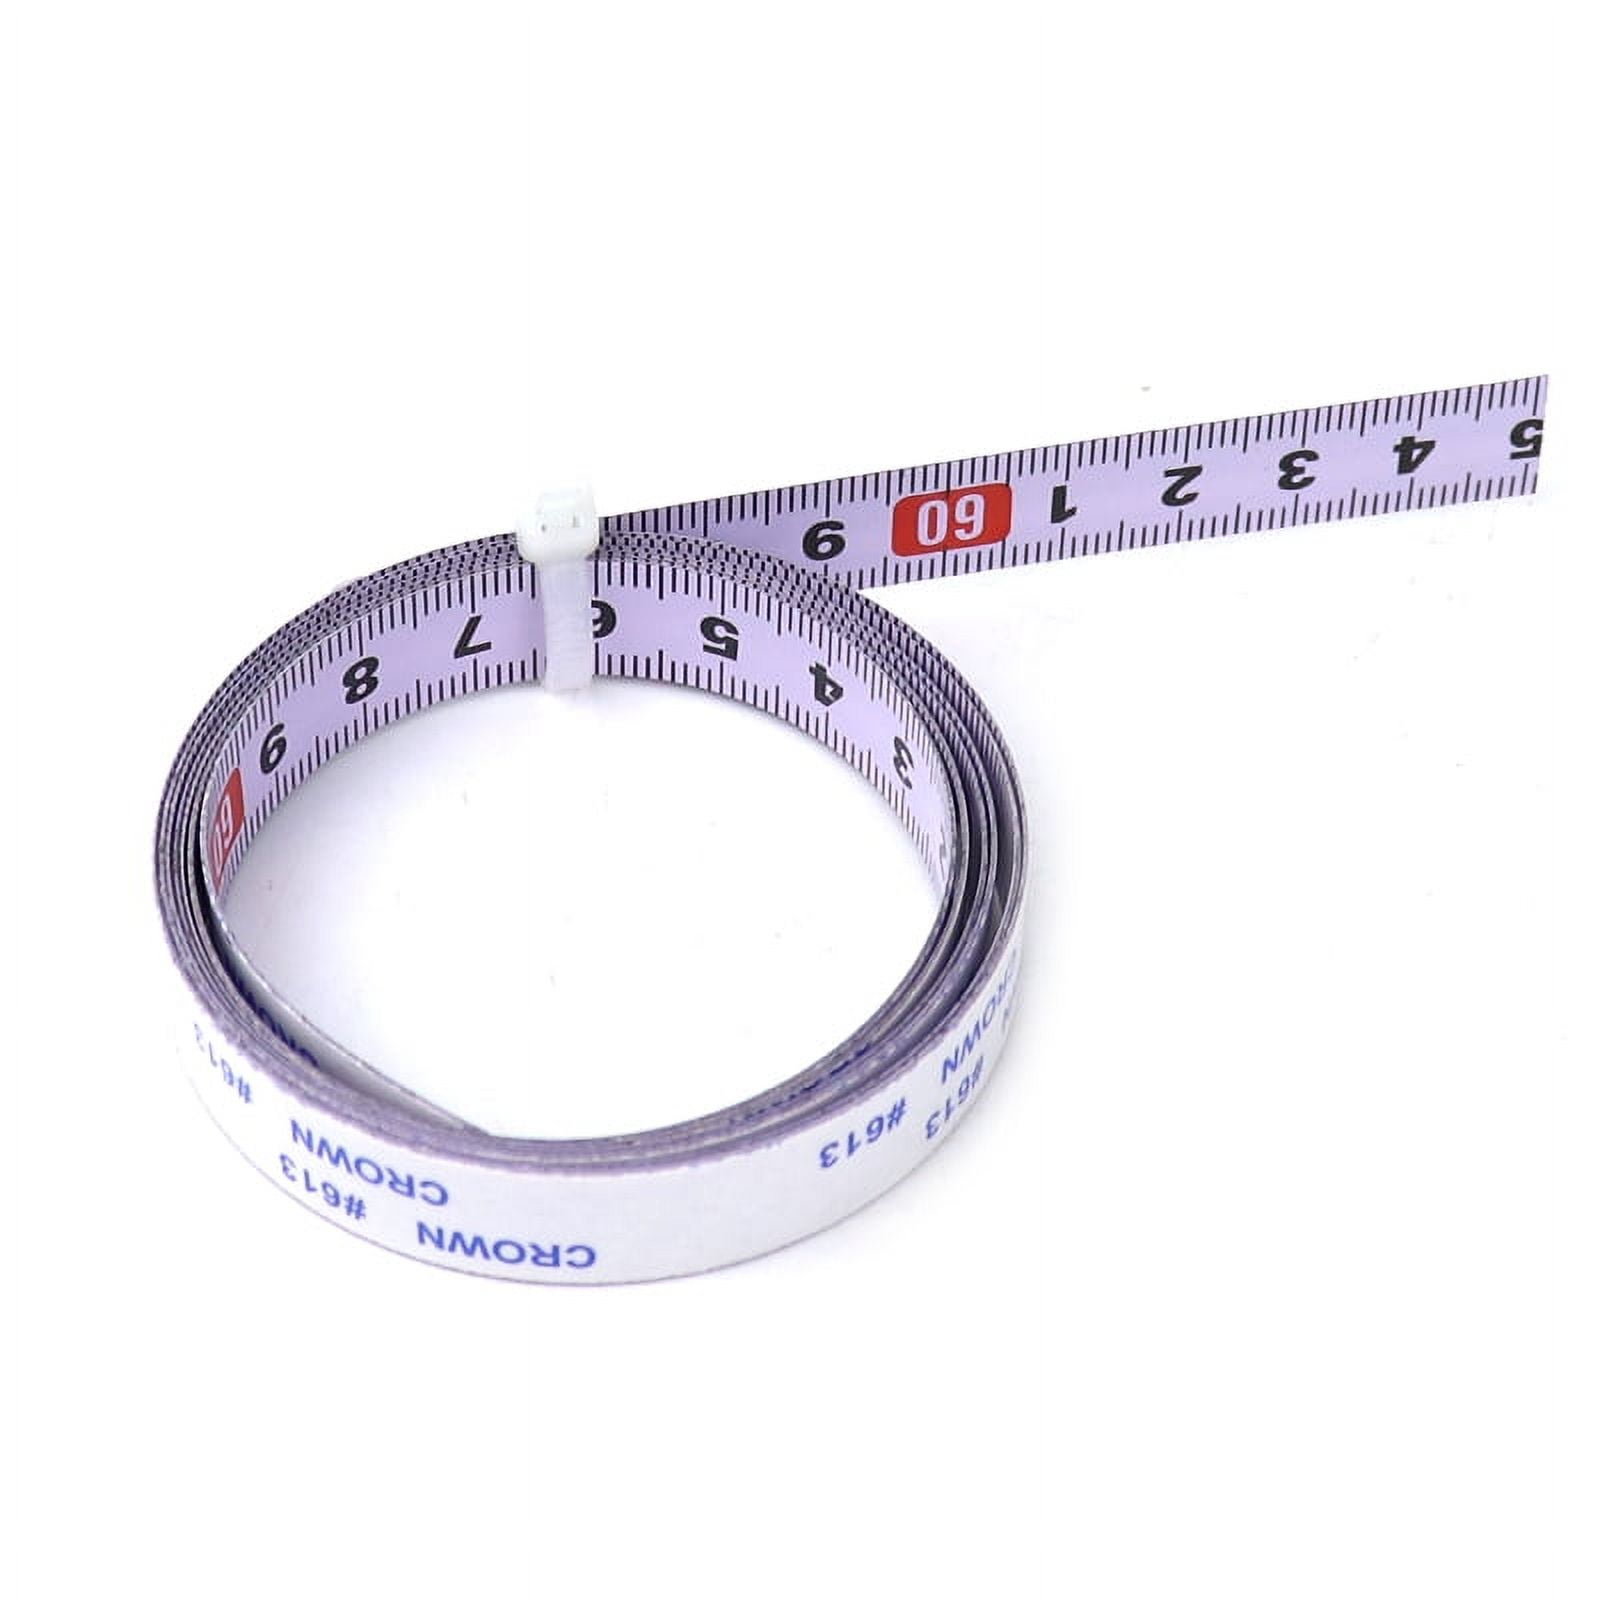 1Pc Self-adhesive Tape Measure, 1/2/3/4/5/6m Centered Measuring Ruler  Self-adhesive Stainless Steel Metric Track Tape Measure Scale Ruler for